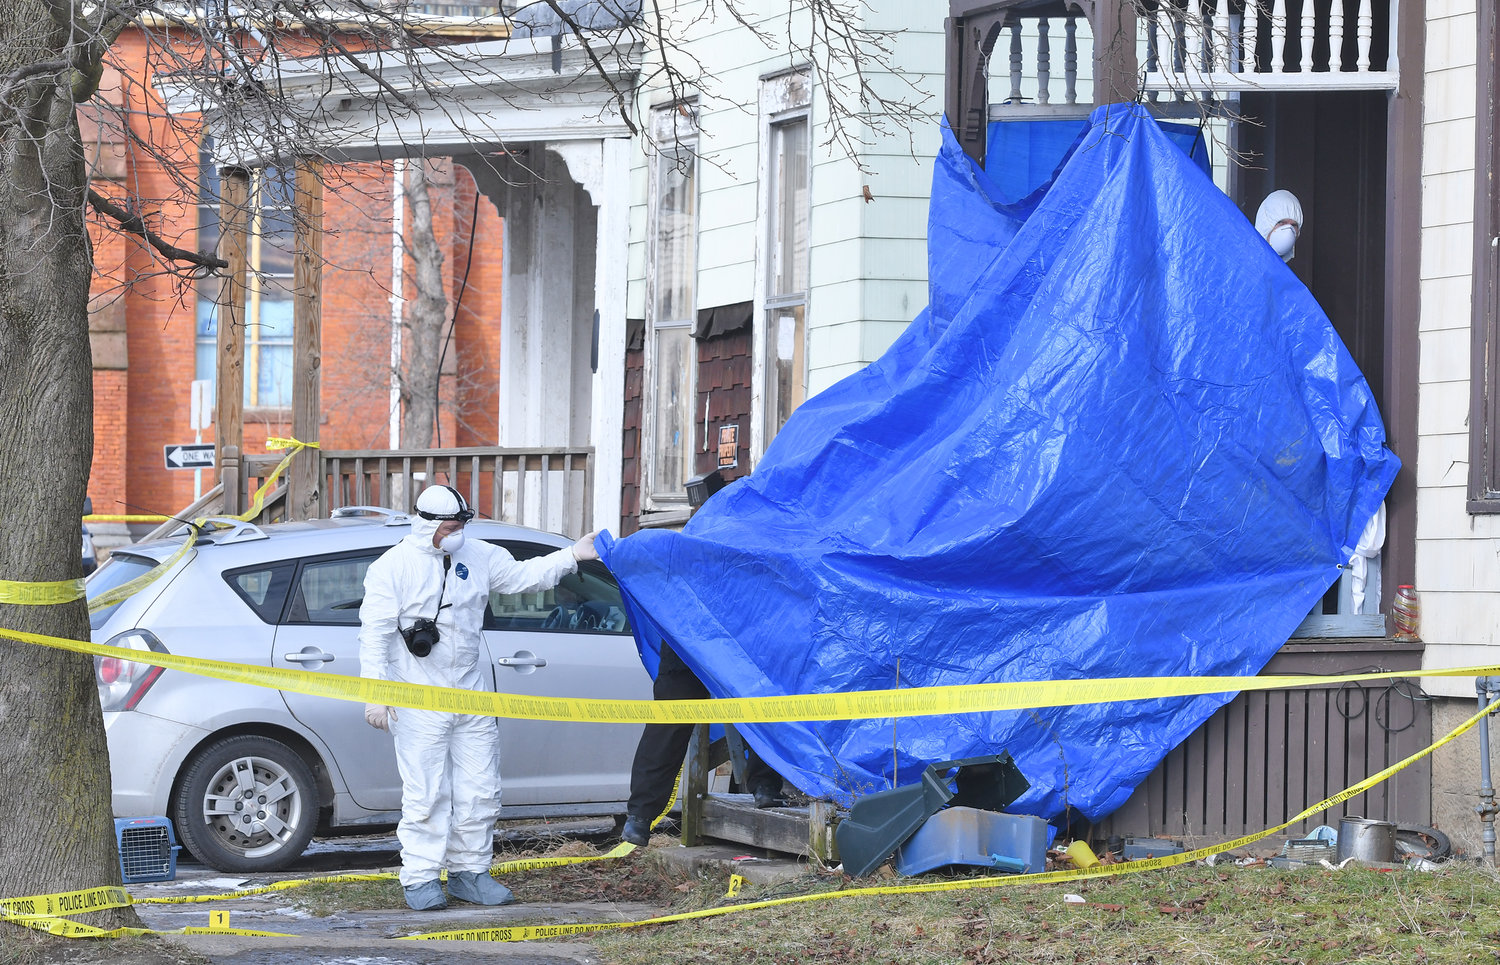 Investigators dressed in protective suits examine the scene after a man was found dead on this porch on Eagle Street in Utica early Wednesday morning. Utica Police said one person is in custody in connection to the suspected homicide.